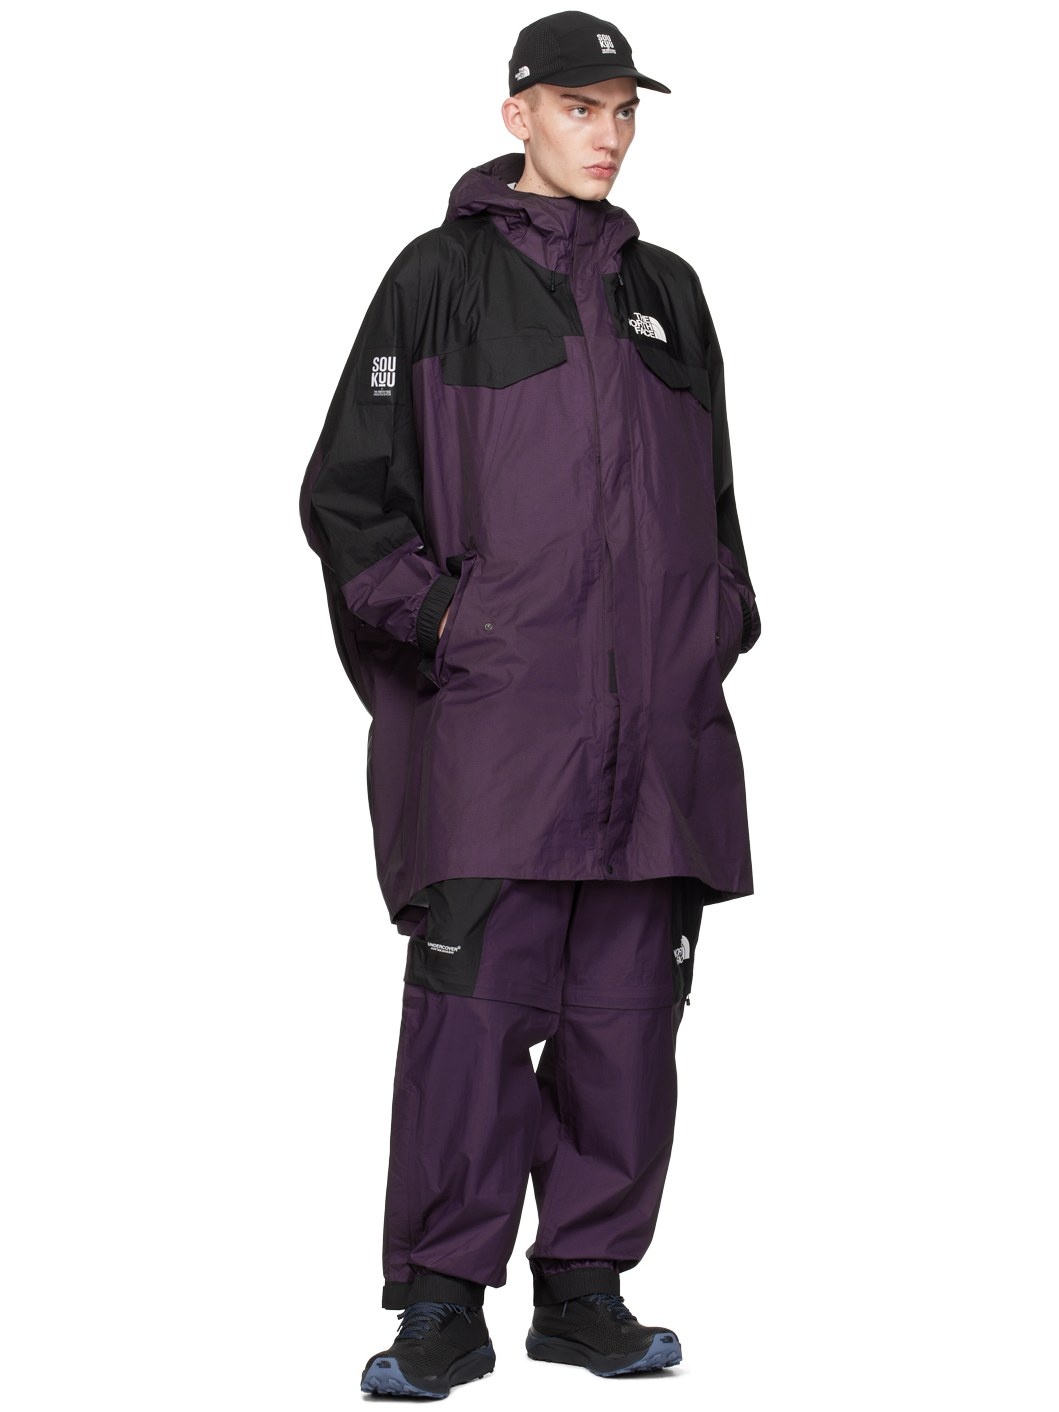 Purple & Black The North Face Edition Hike Jacket - 4